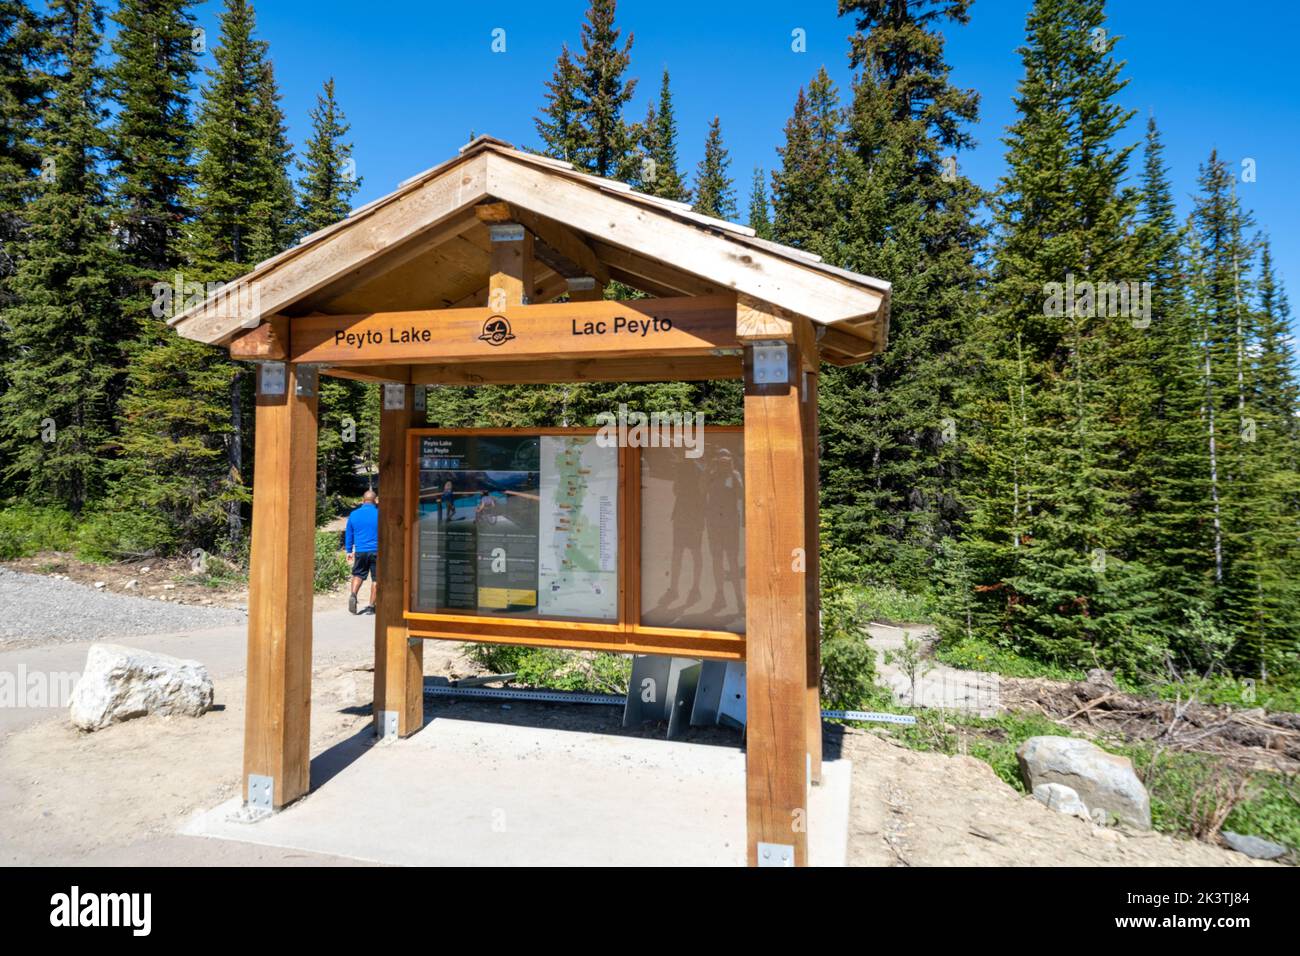 Banff, Alberta, Canada - July 12, 2022: Sign, map and information for Peyto Lake at the trailhead Stock Photo